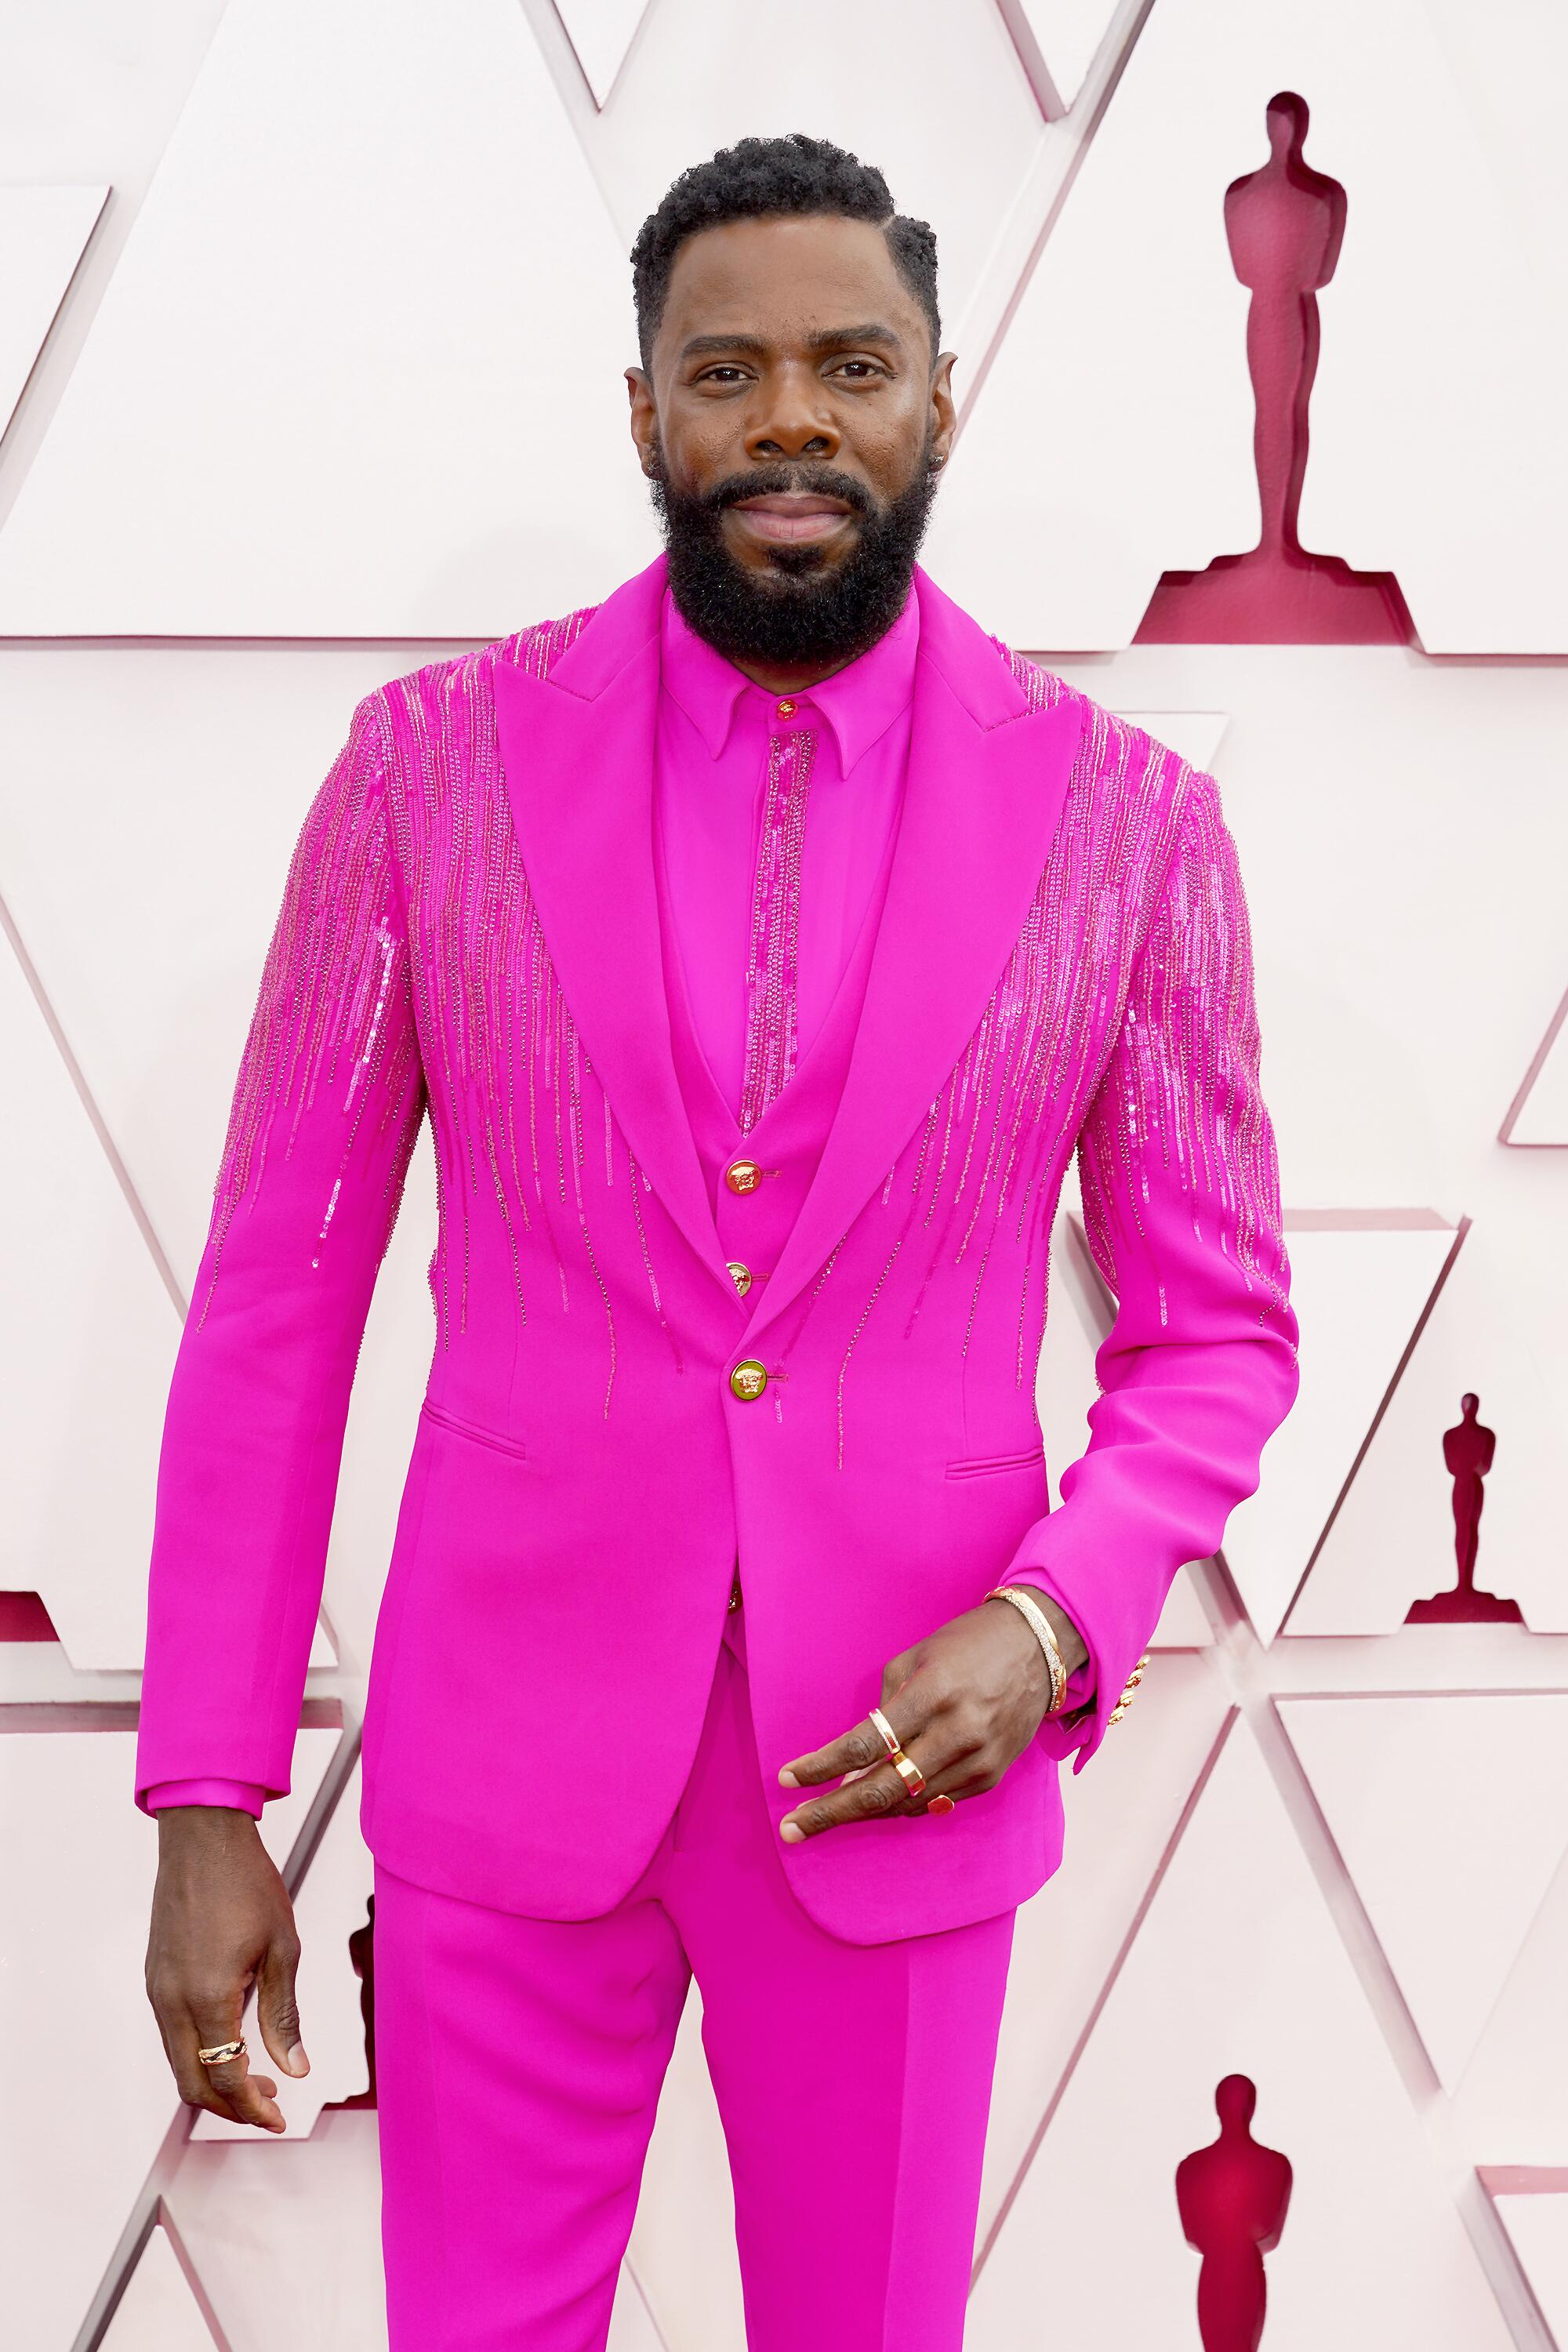 Colman Domingo arrives at the Oscars in a bright dark pink suit and shirt.